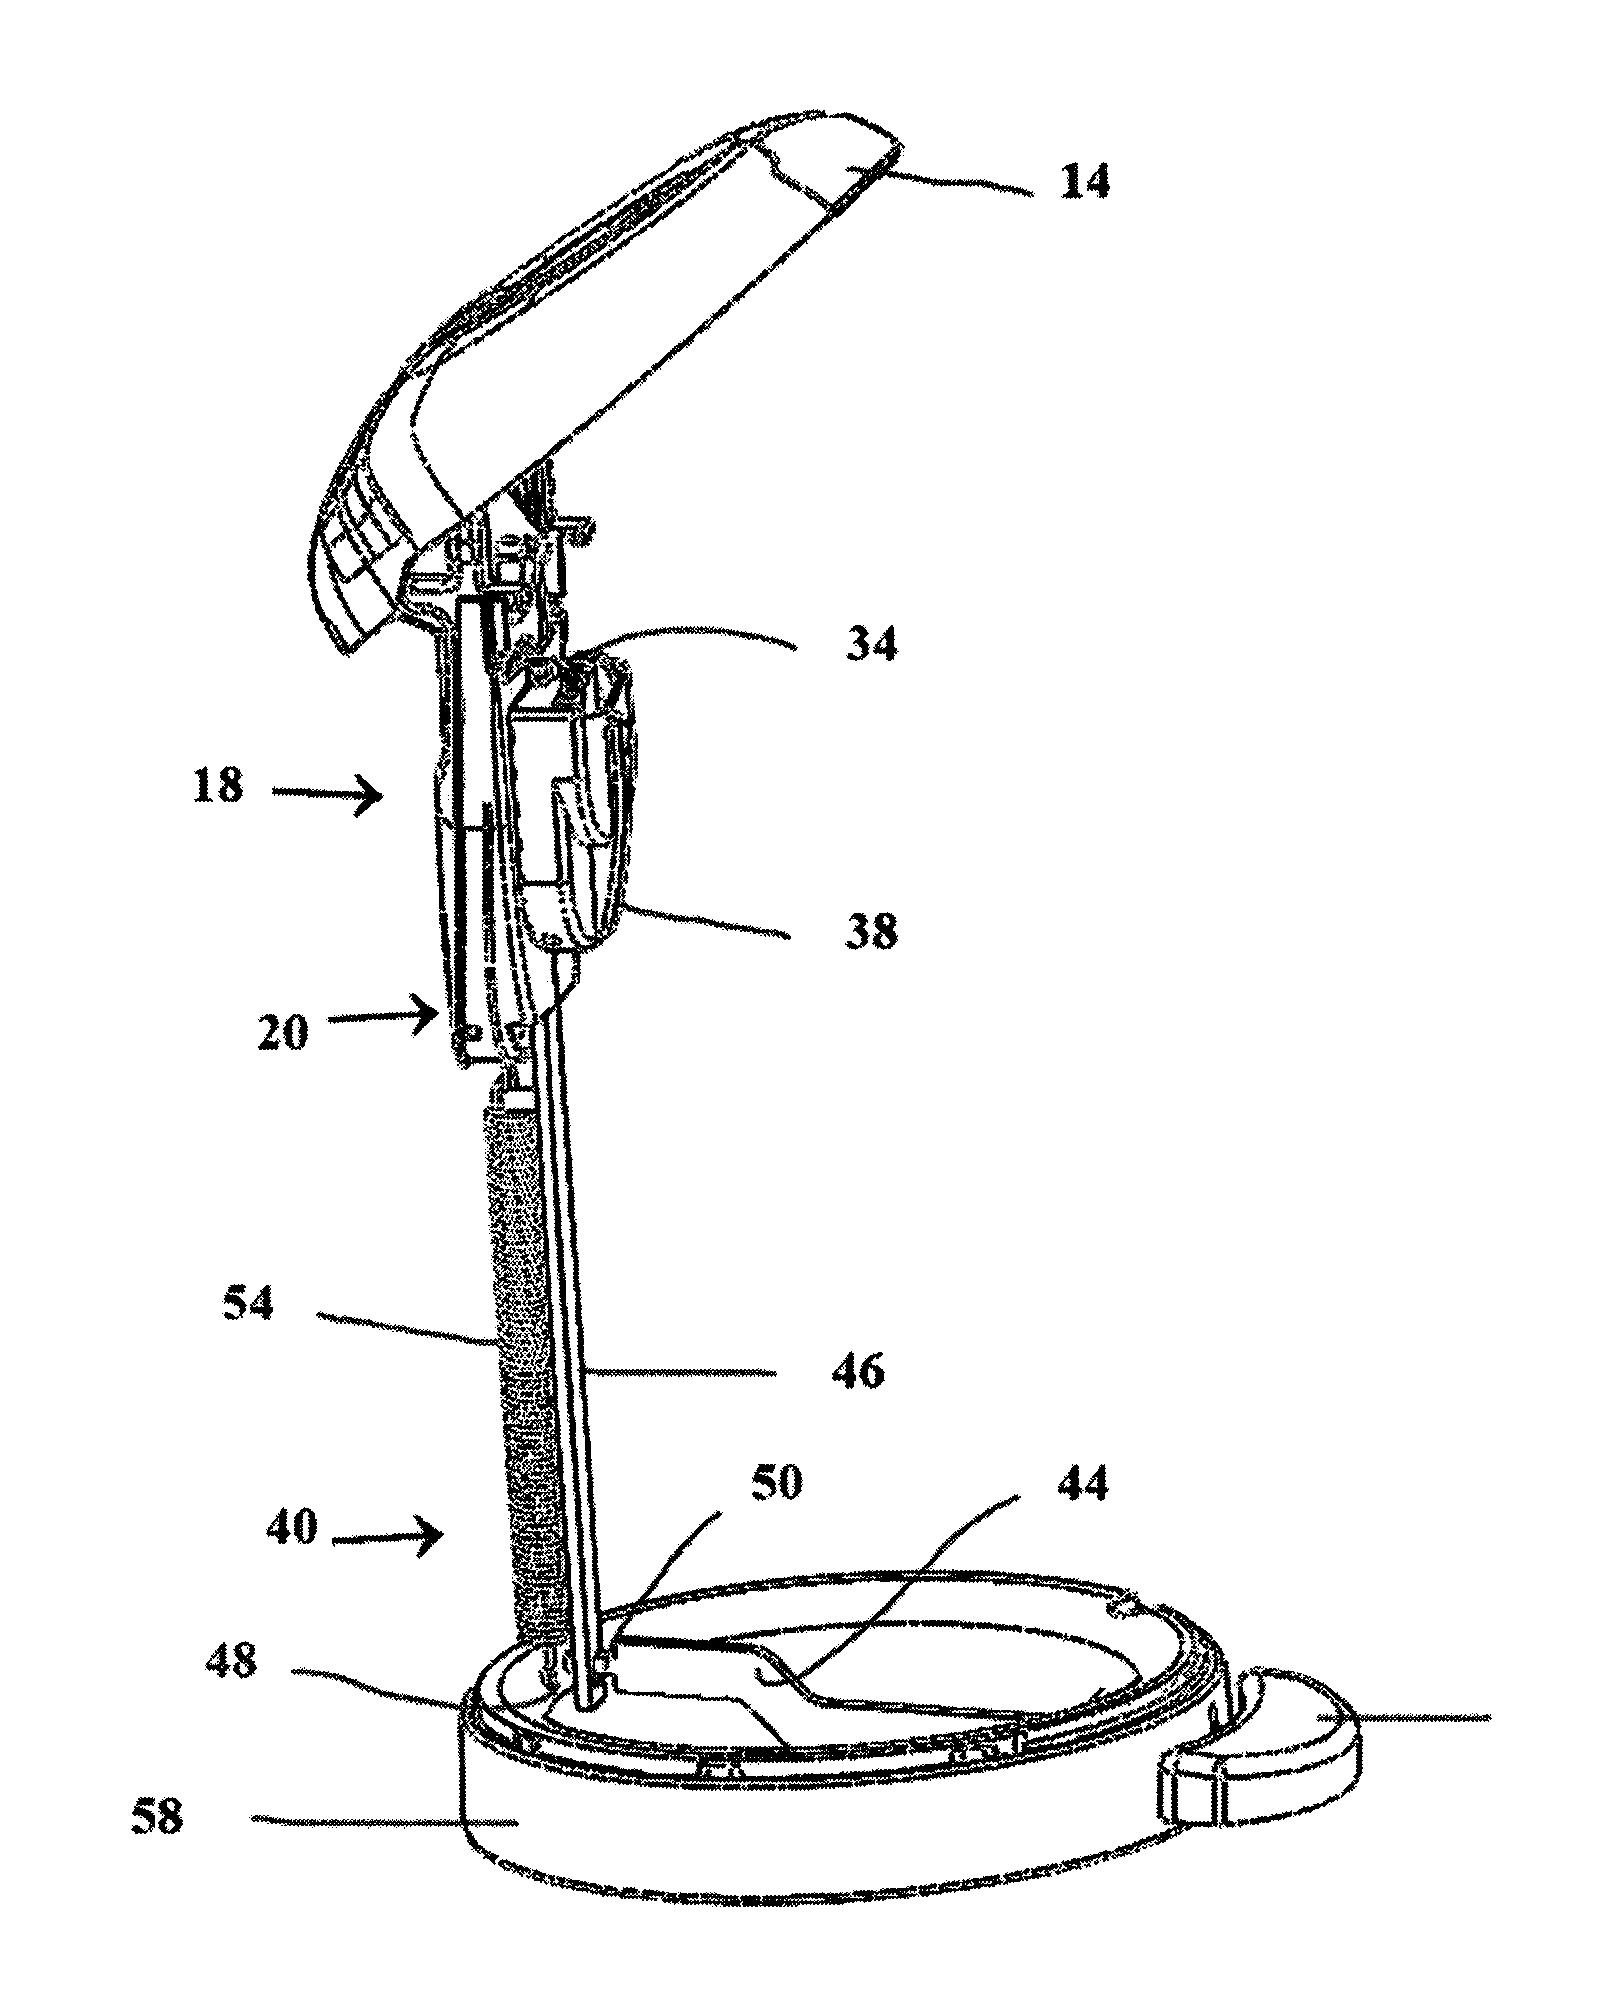 Waste disposal device with self-closing lid